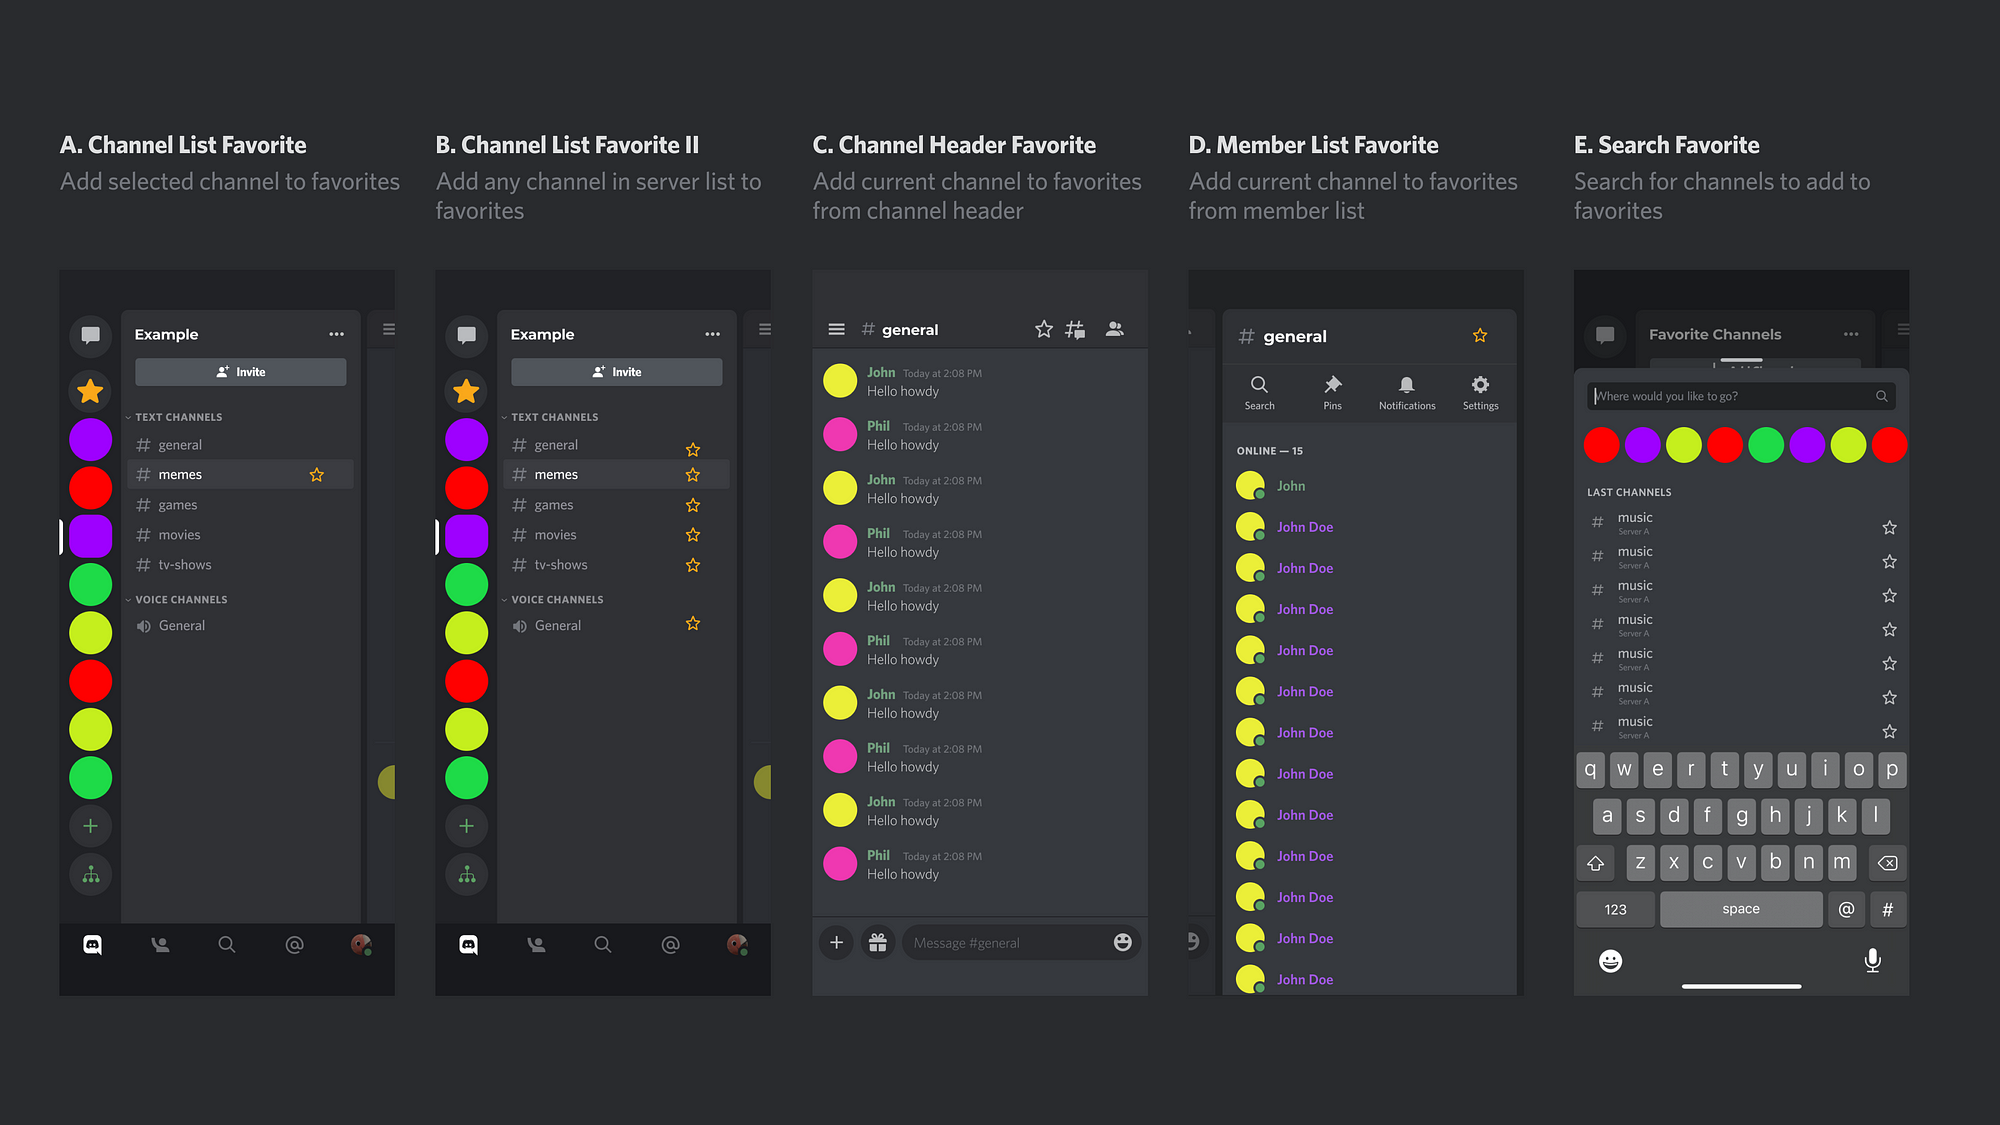 Leveling Up Discord with Favorite Channels, by Ibrahim Ismail